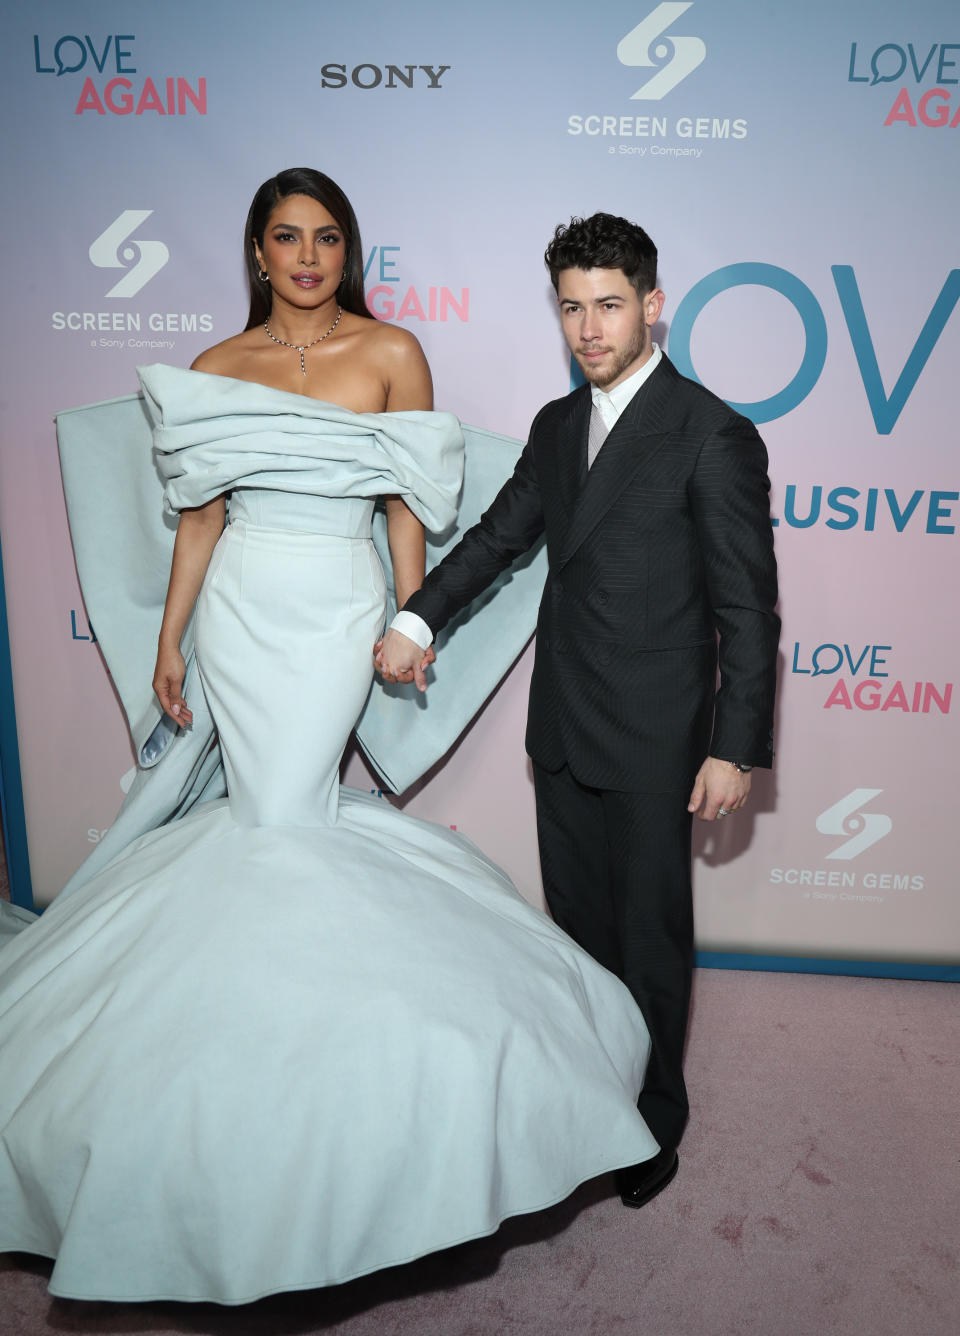 NEW YORK, NEW YORK - MAY 03: Priyanka Chopra and Nick Jonas attend the "Love Again" New York screening at AMC Lincoln Square Theater on May 03, 2023 in New York City. (Photo by Manny Carabel/WireImage)